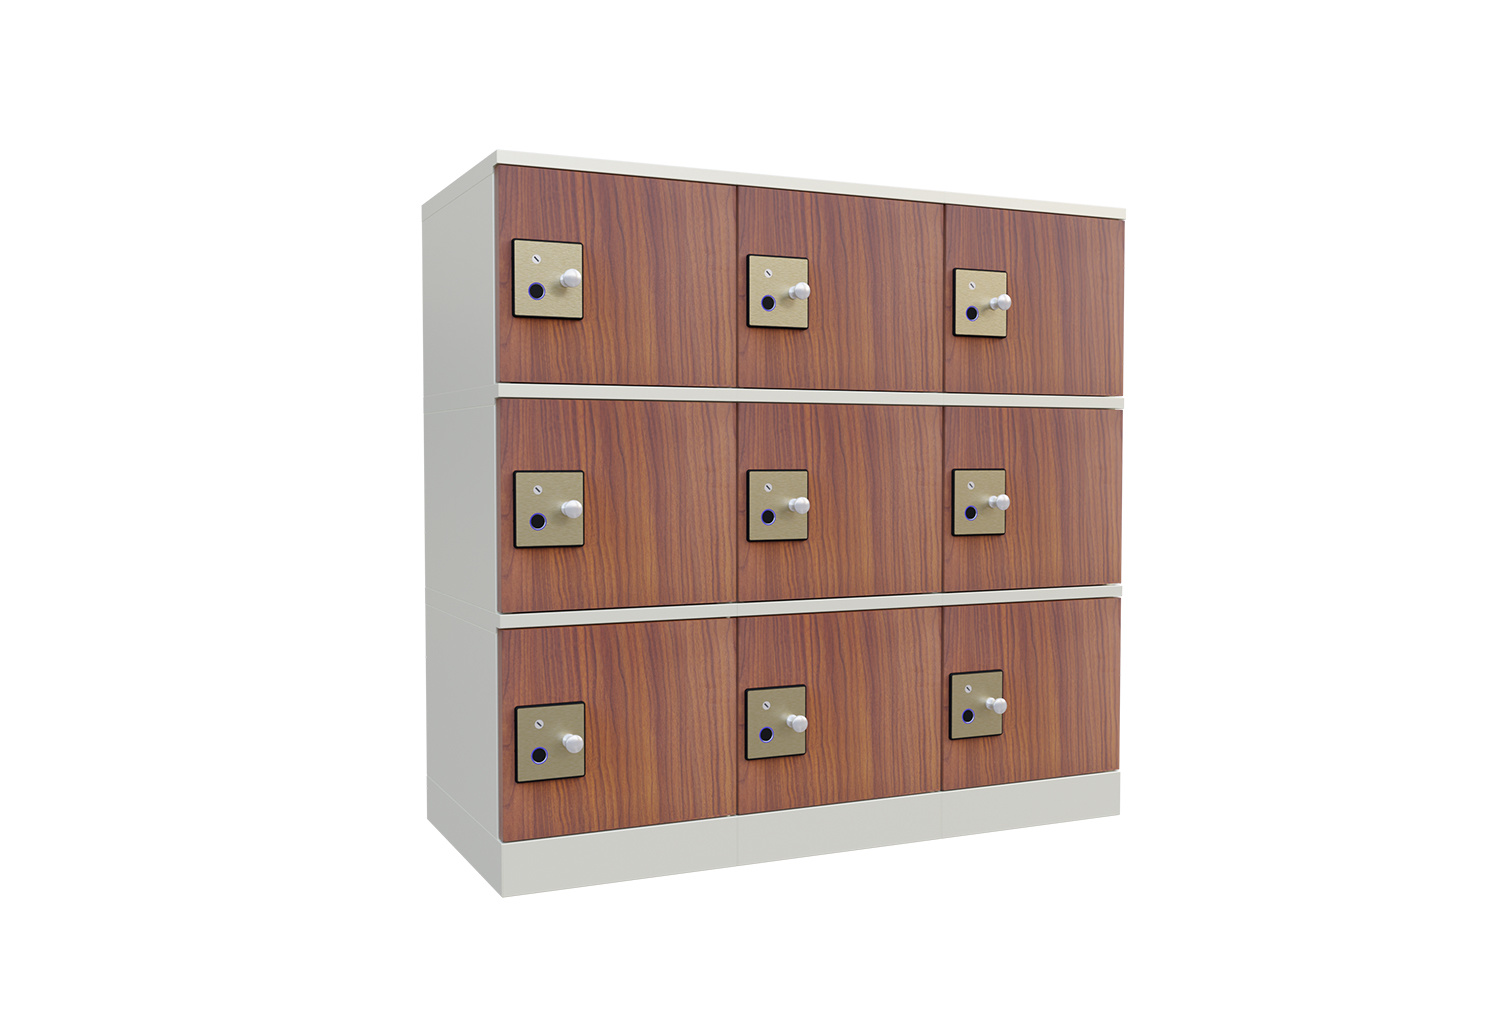 Basic introduction to automated parcel lockers